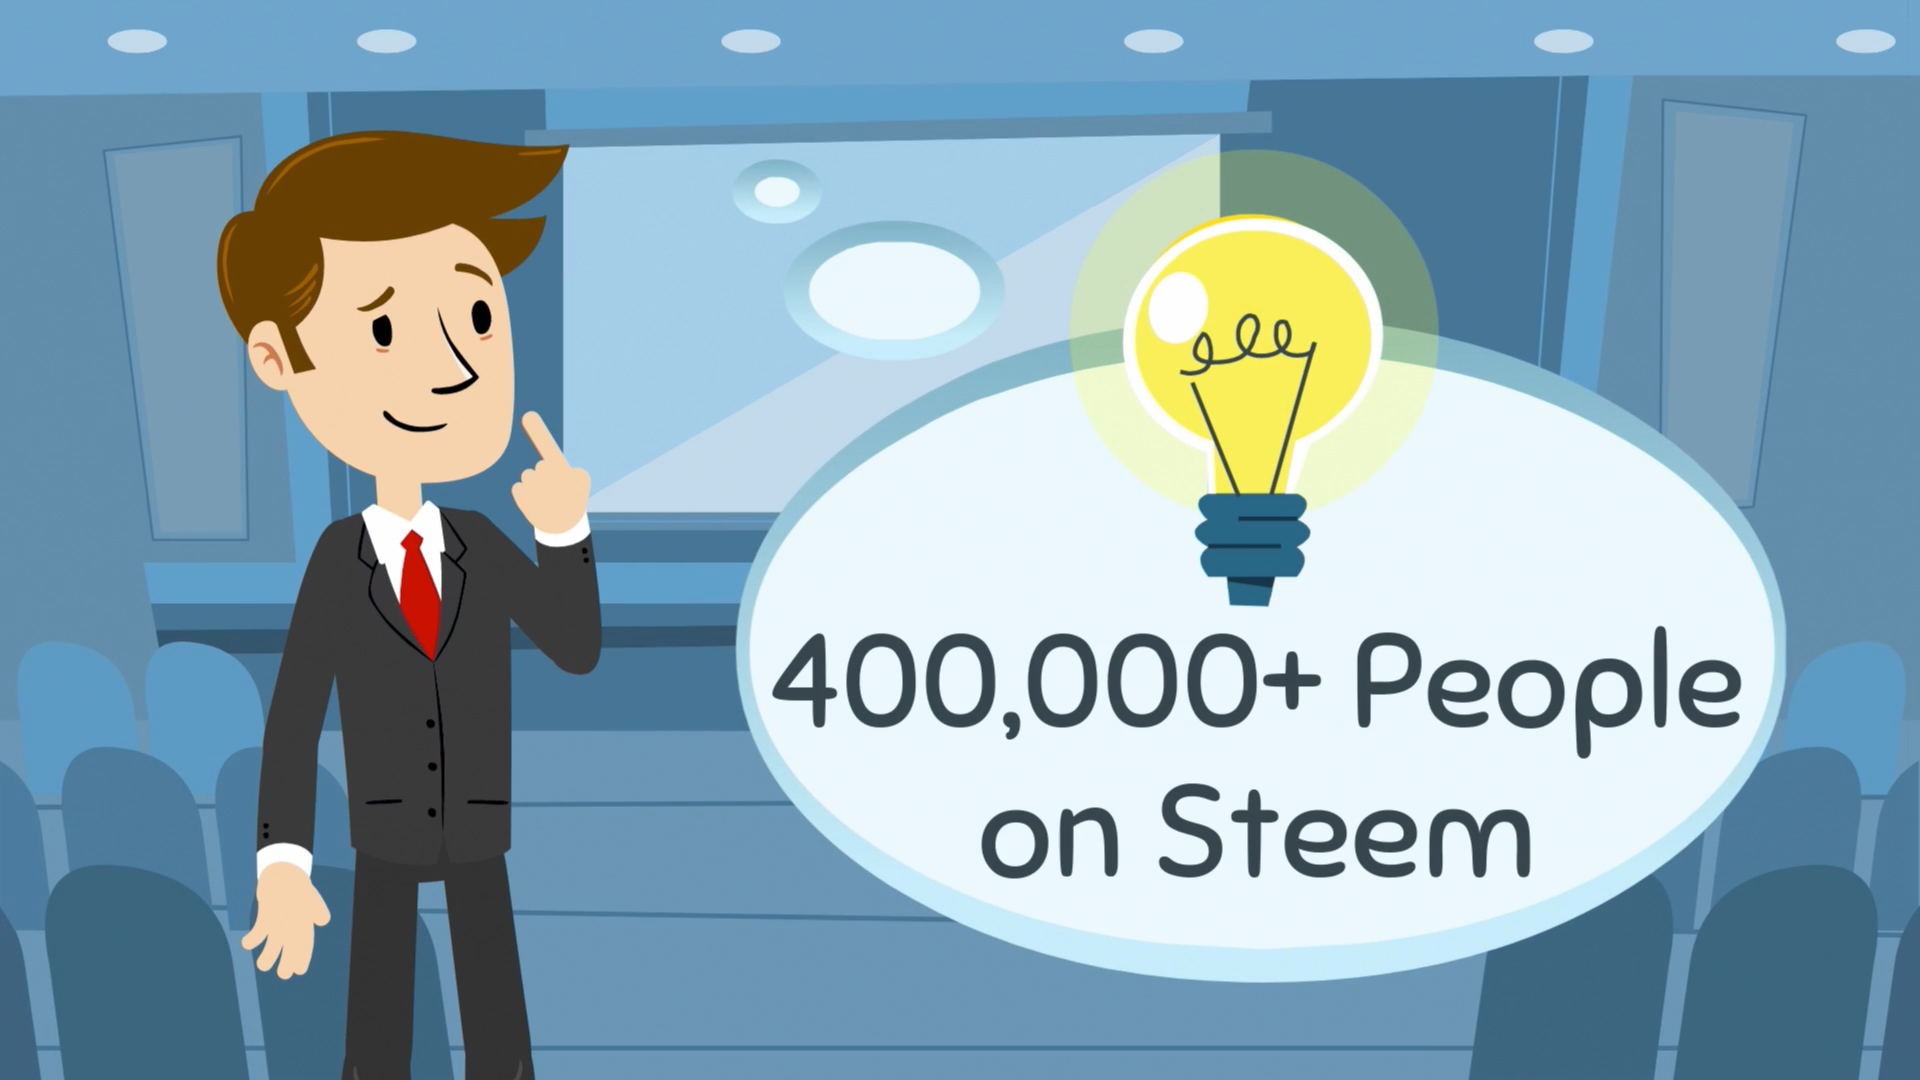 Steem video ad 7 frame 3.png